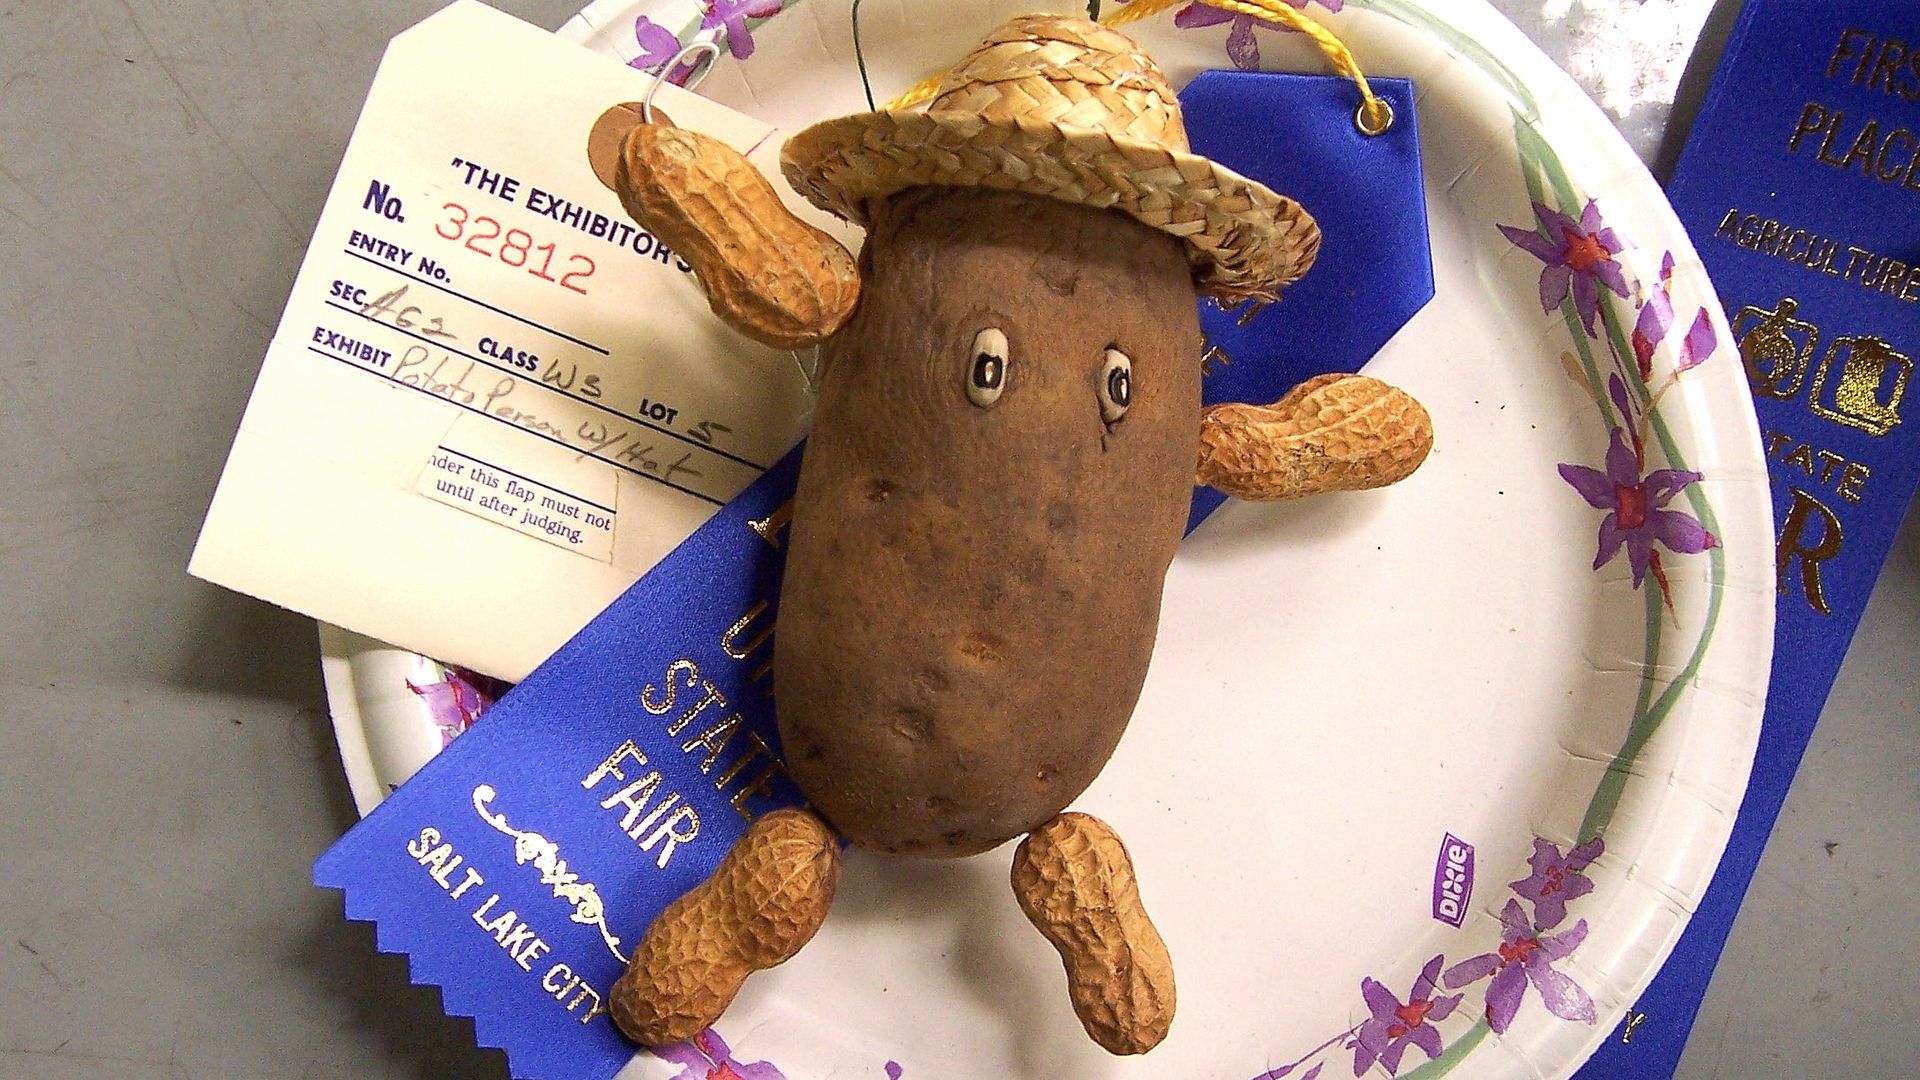 A potato with peanut arms and legs, googley eyes and a straw hat sits on a plate with blue ribbons at the state fair.